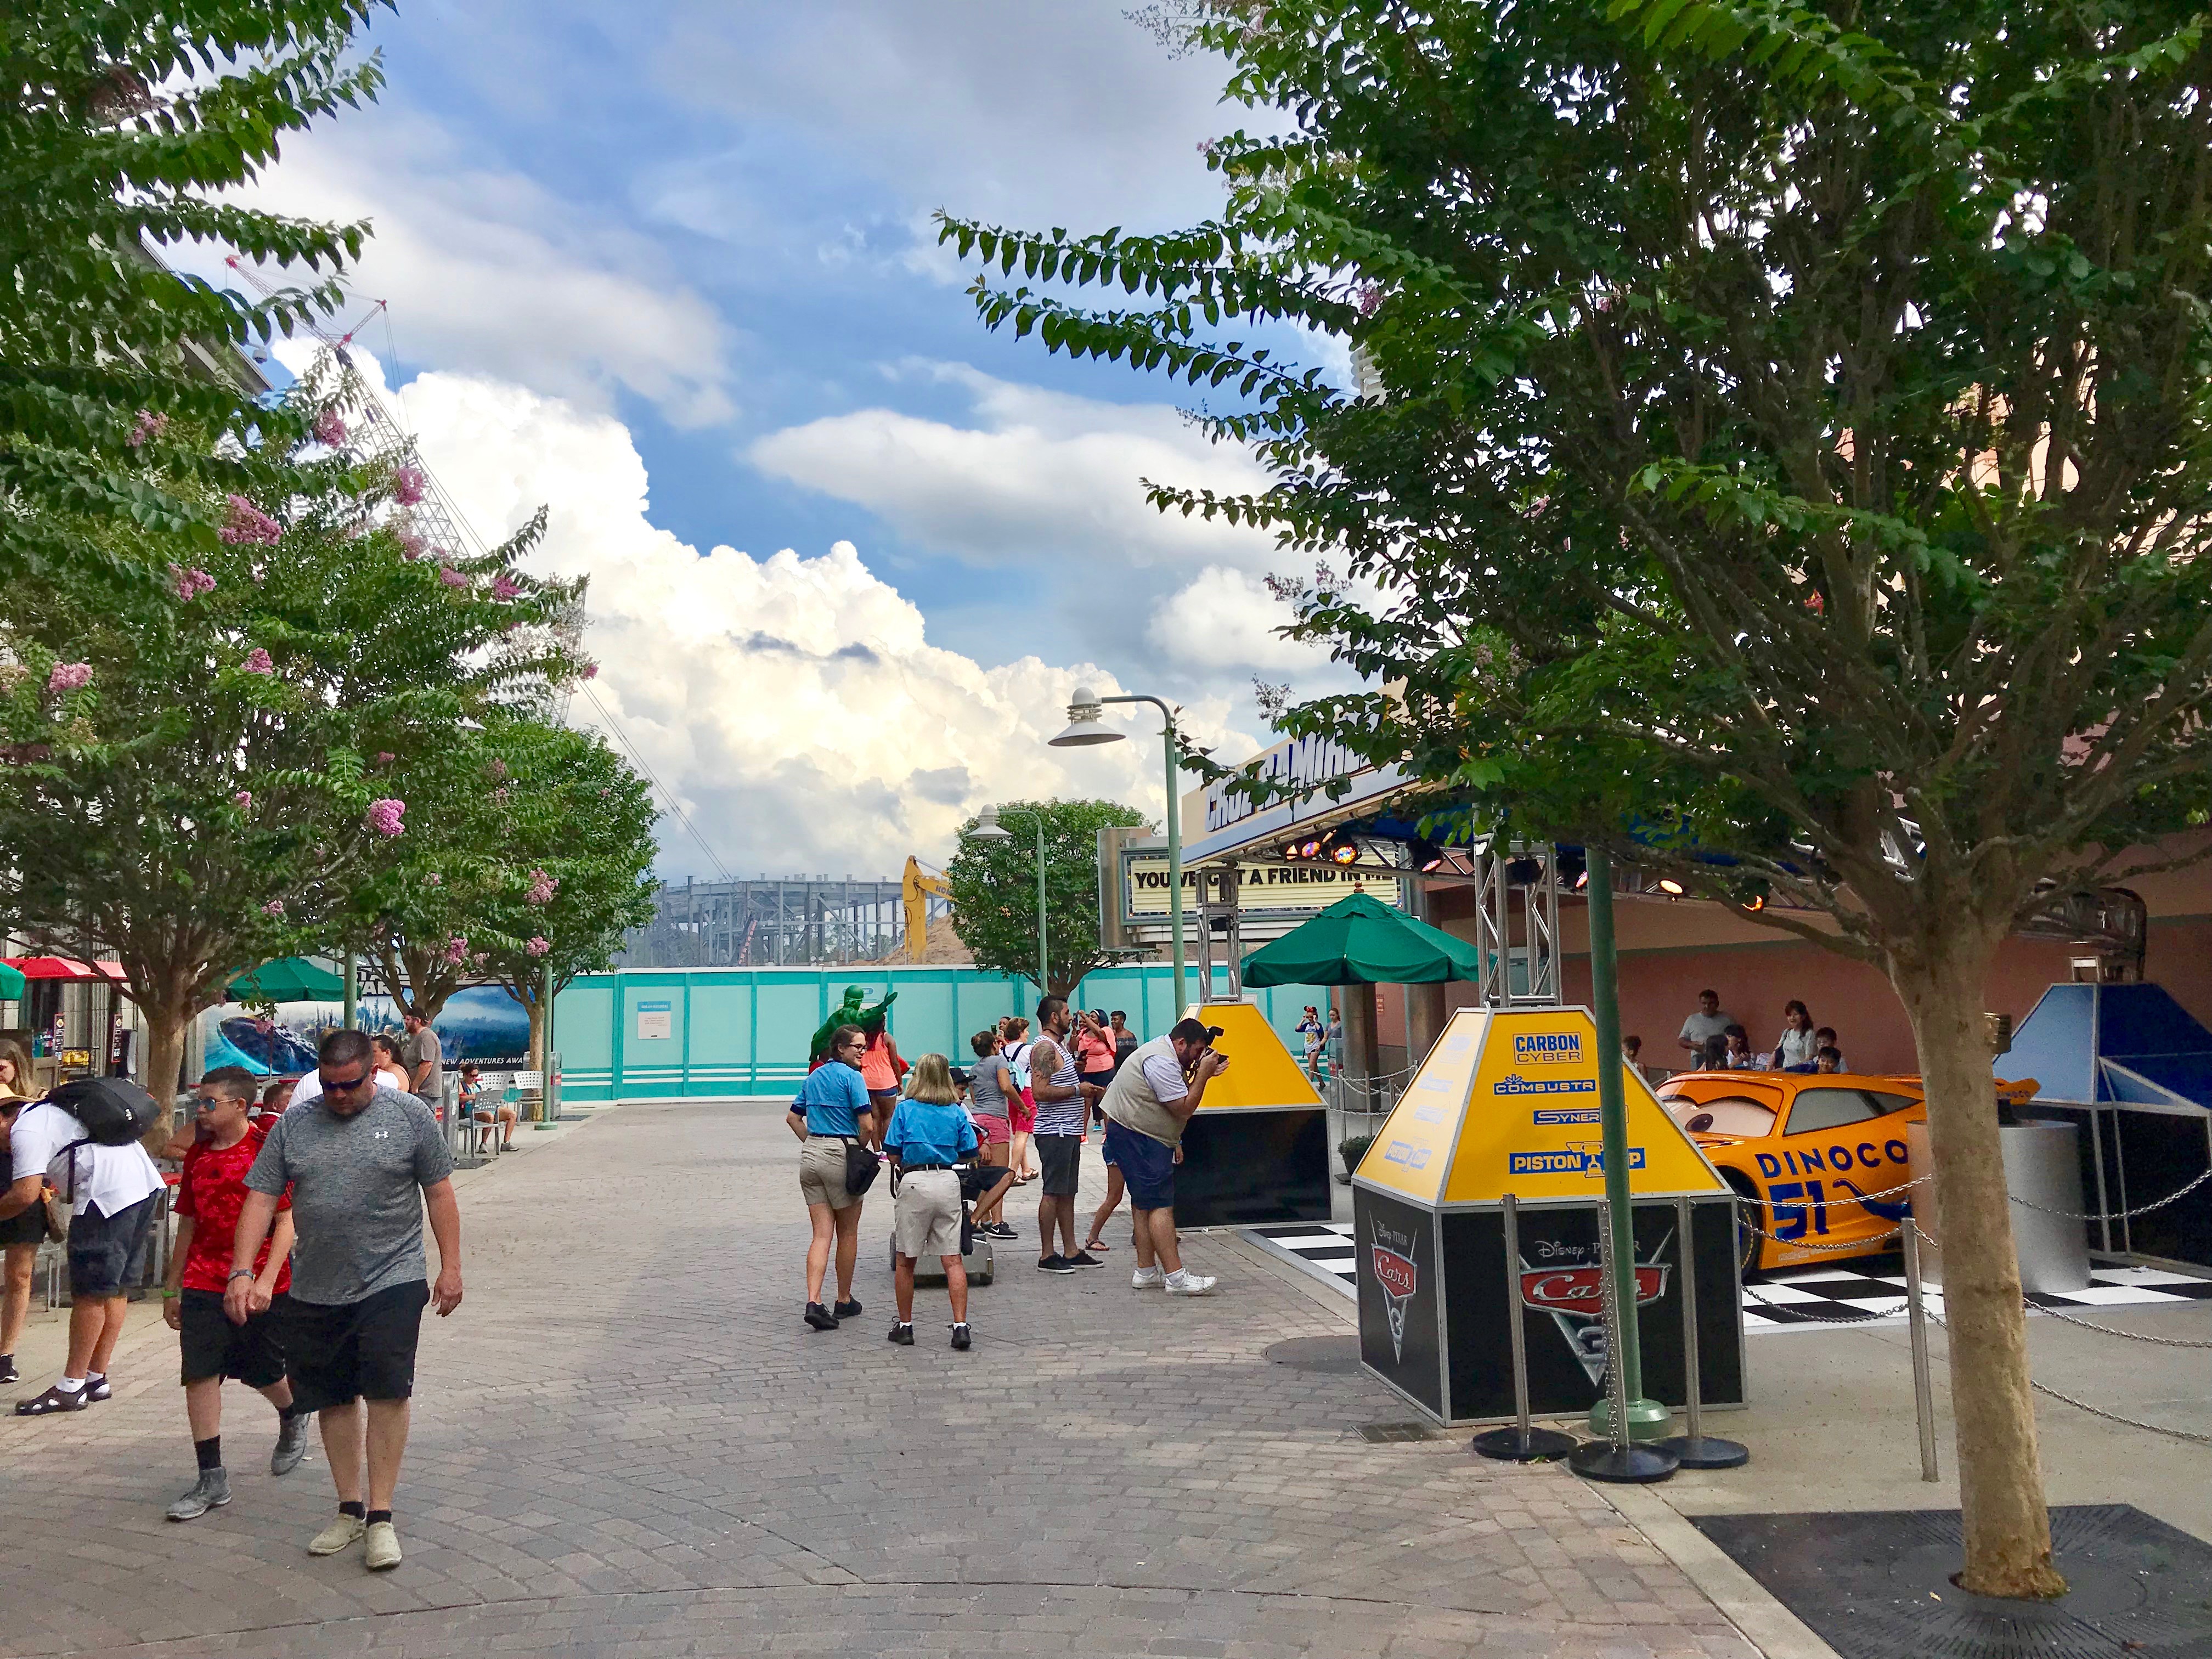 Disney's Hollywood Studios Summer 2017 Update - LaughingPlace.com